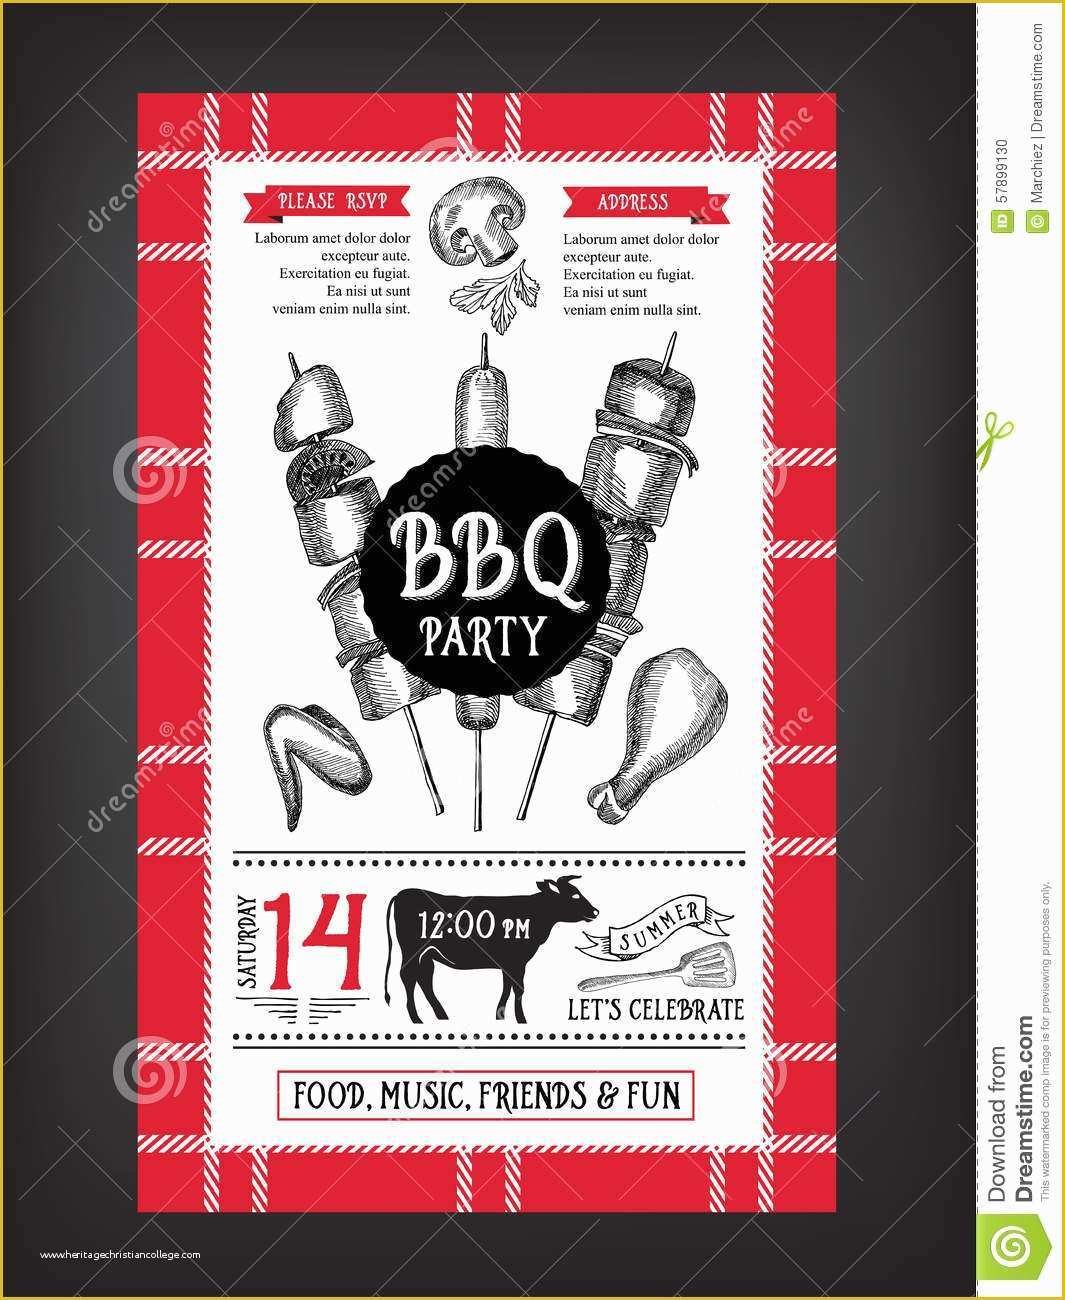 Graphic Flyer Templates Free Of Barbecue Party Invitation Bbq Template Menu Design Food